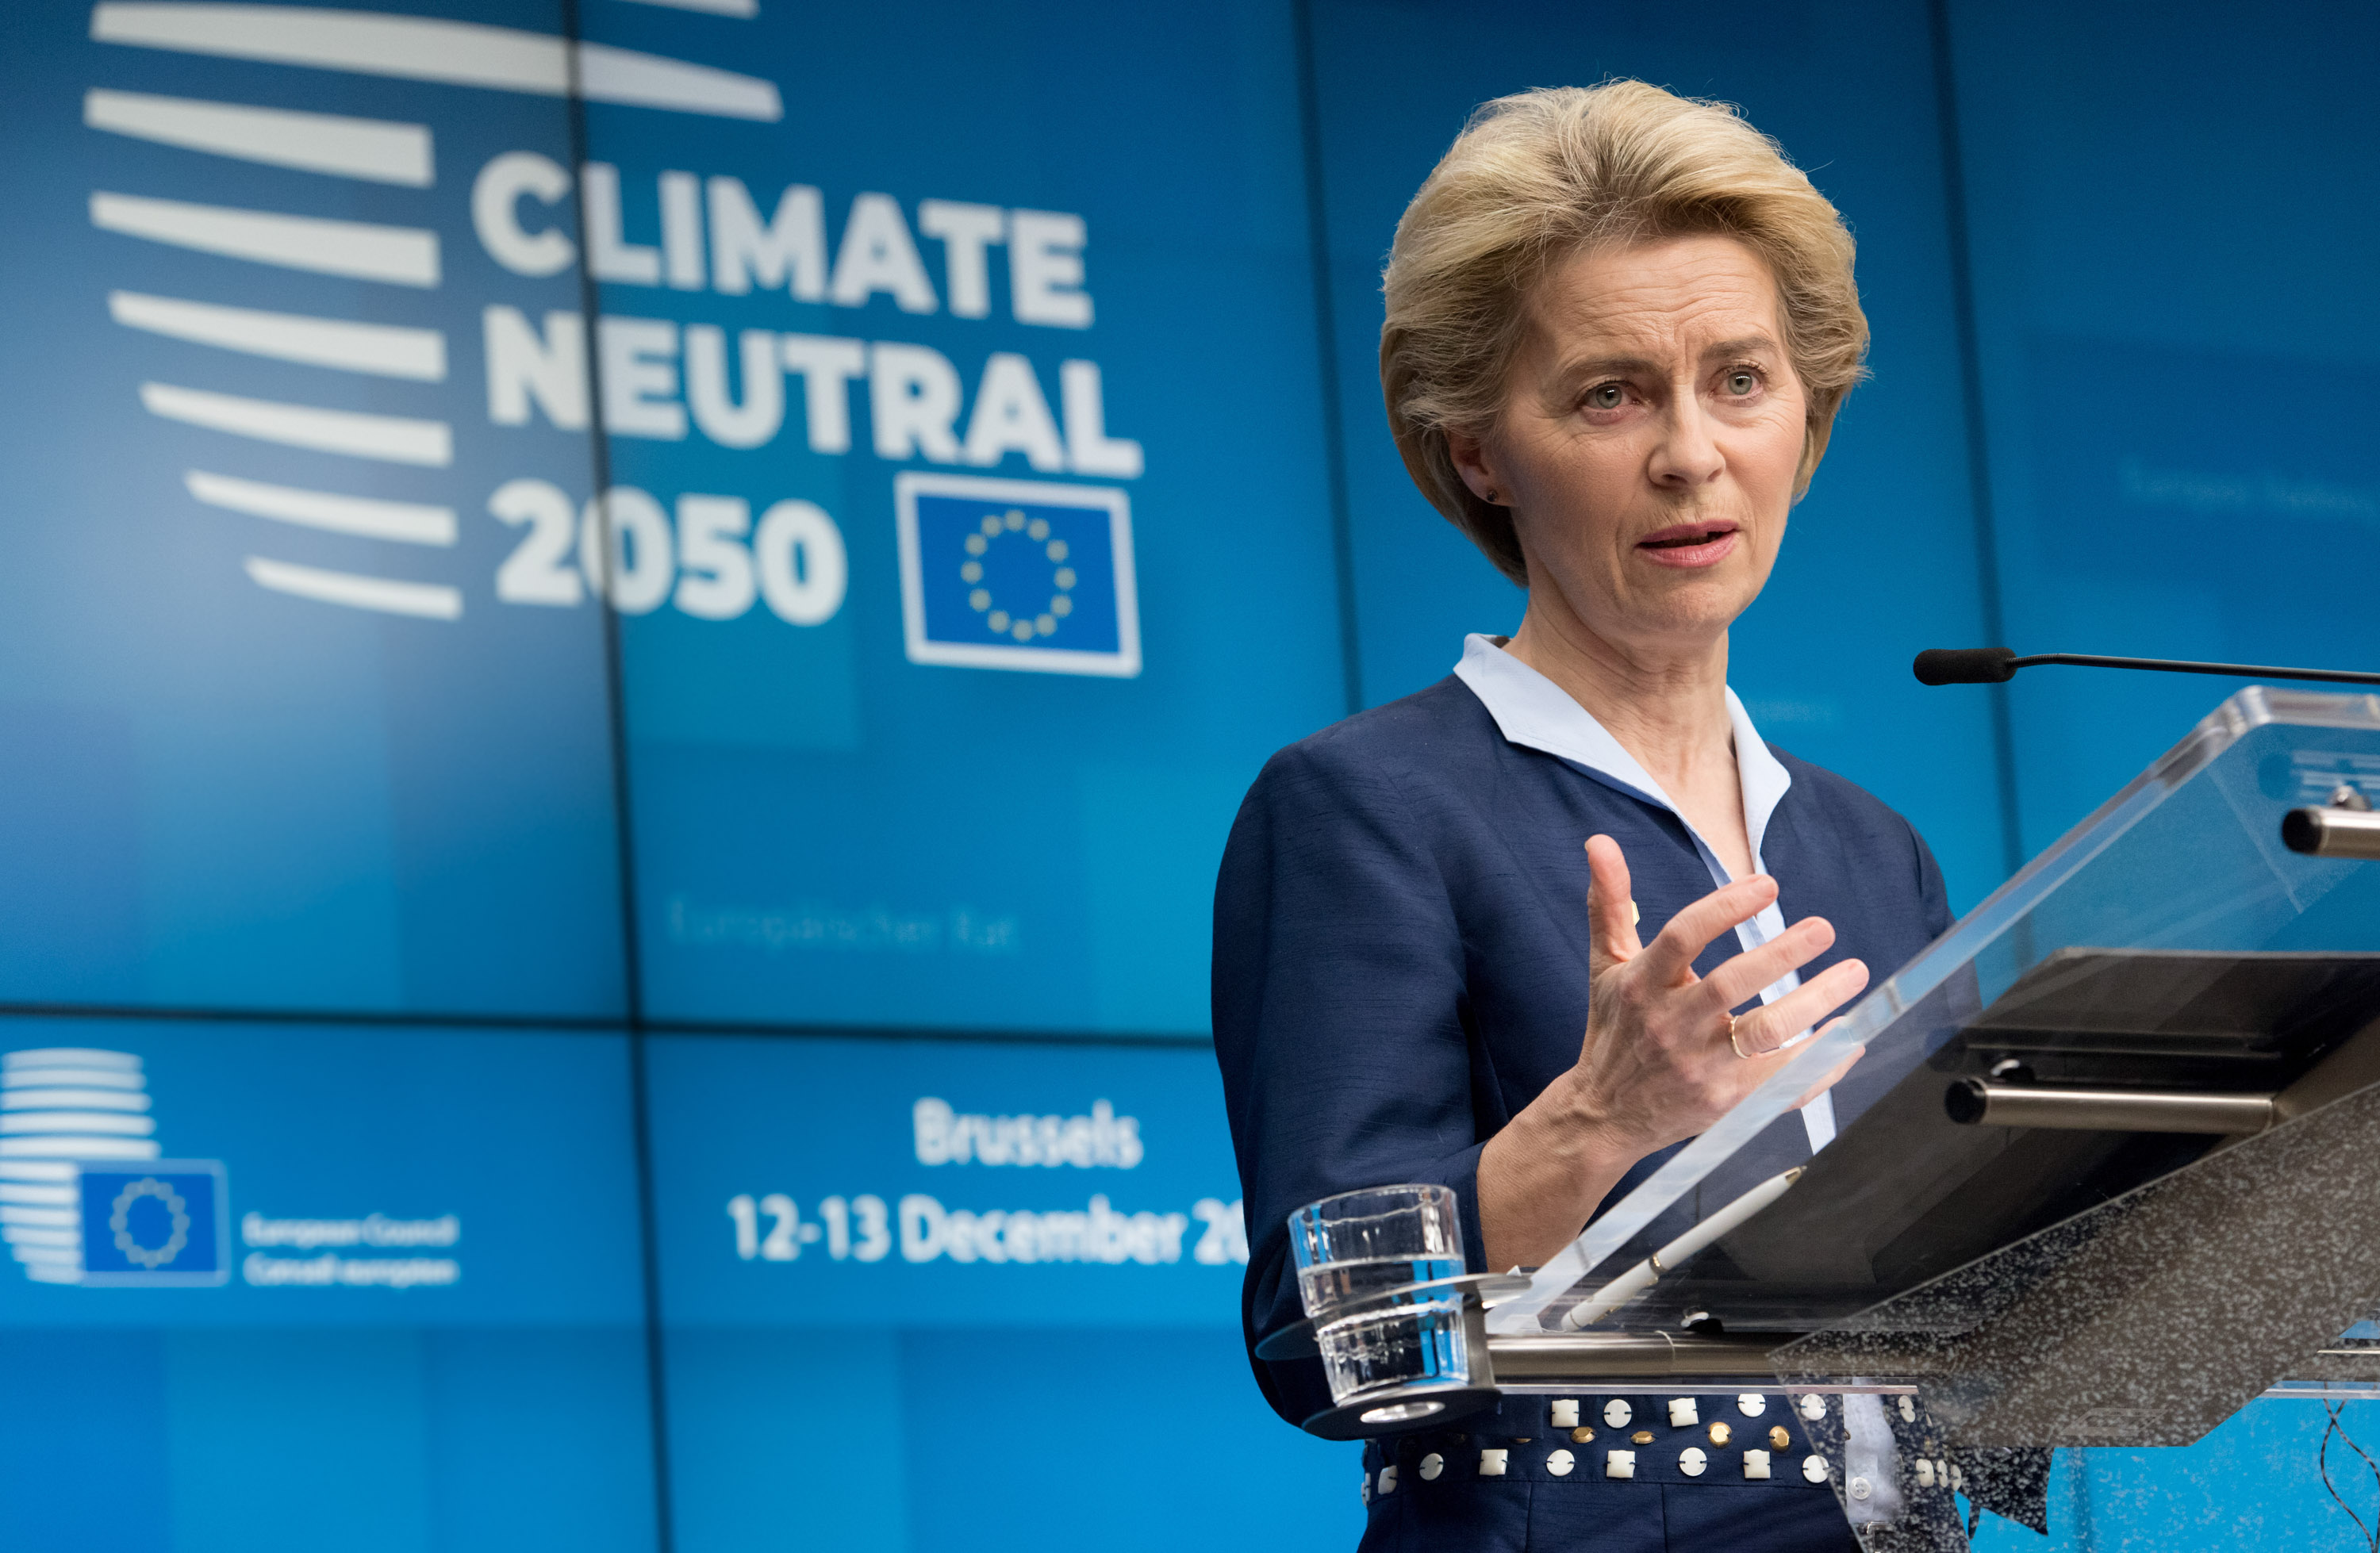 Europe has unveiled a plan to eliminate climate emissions by 2050 MIT